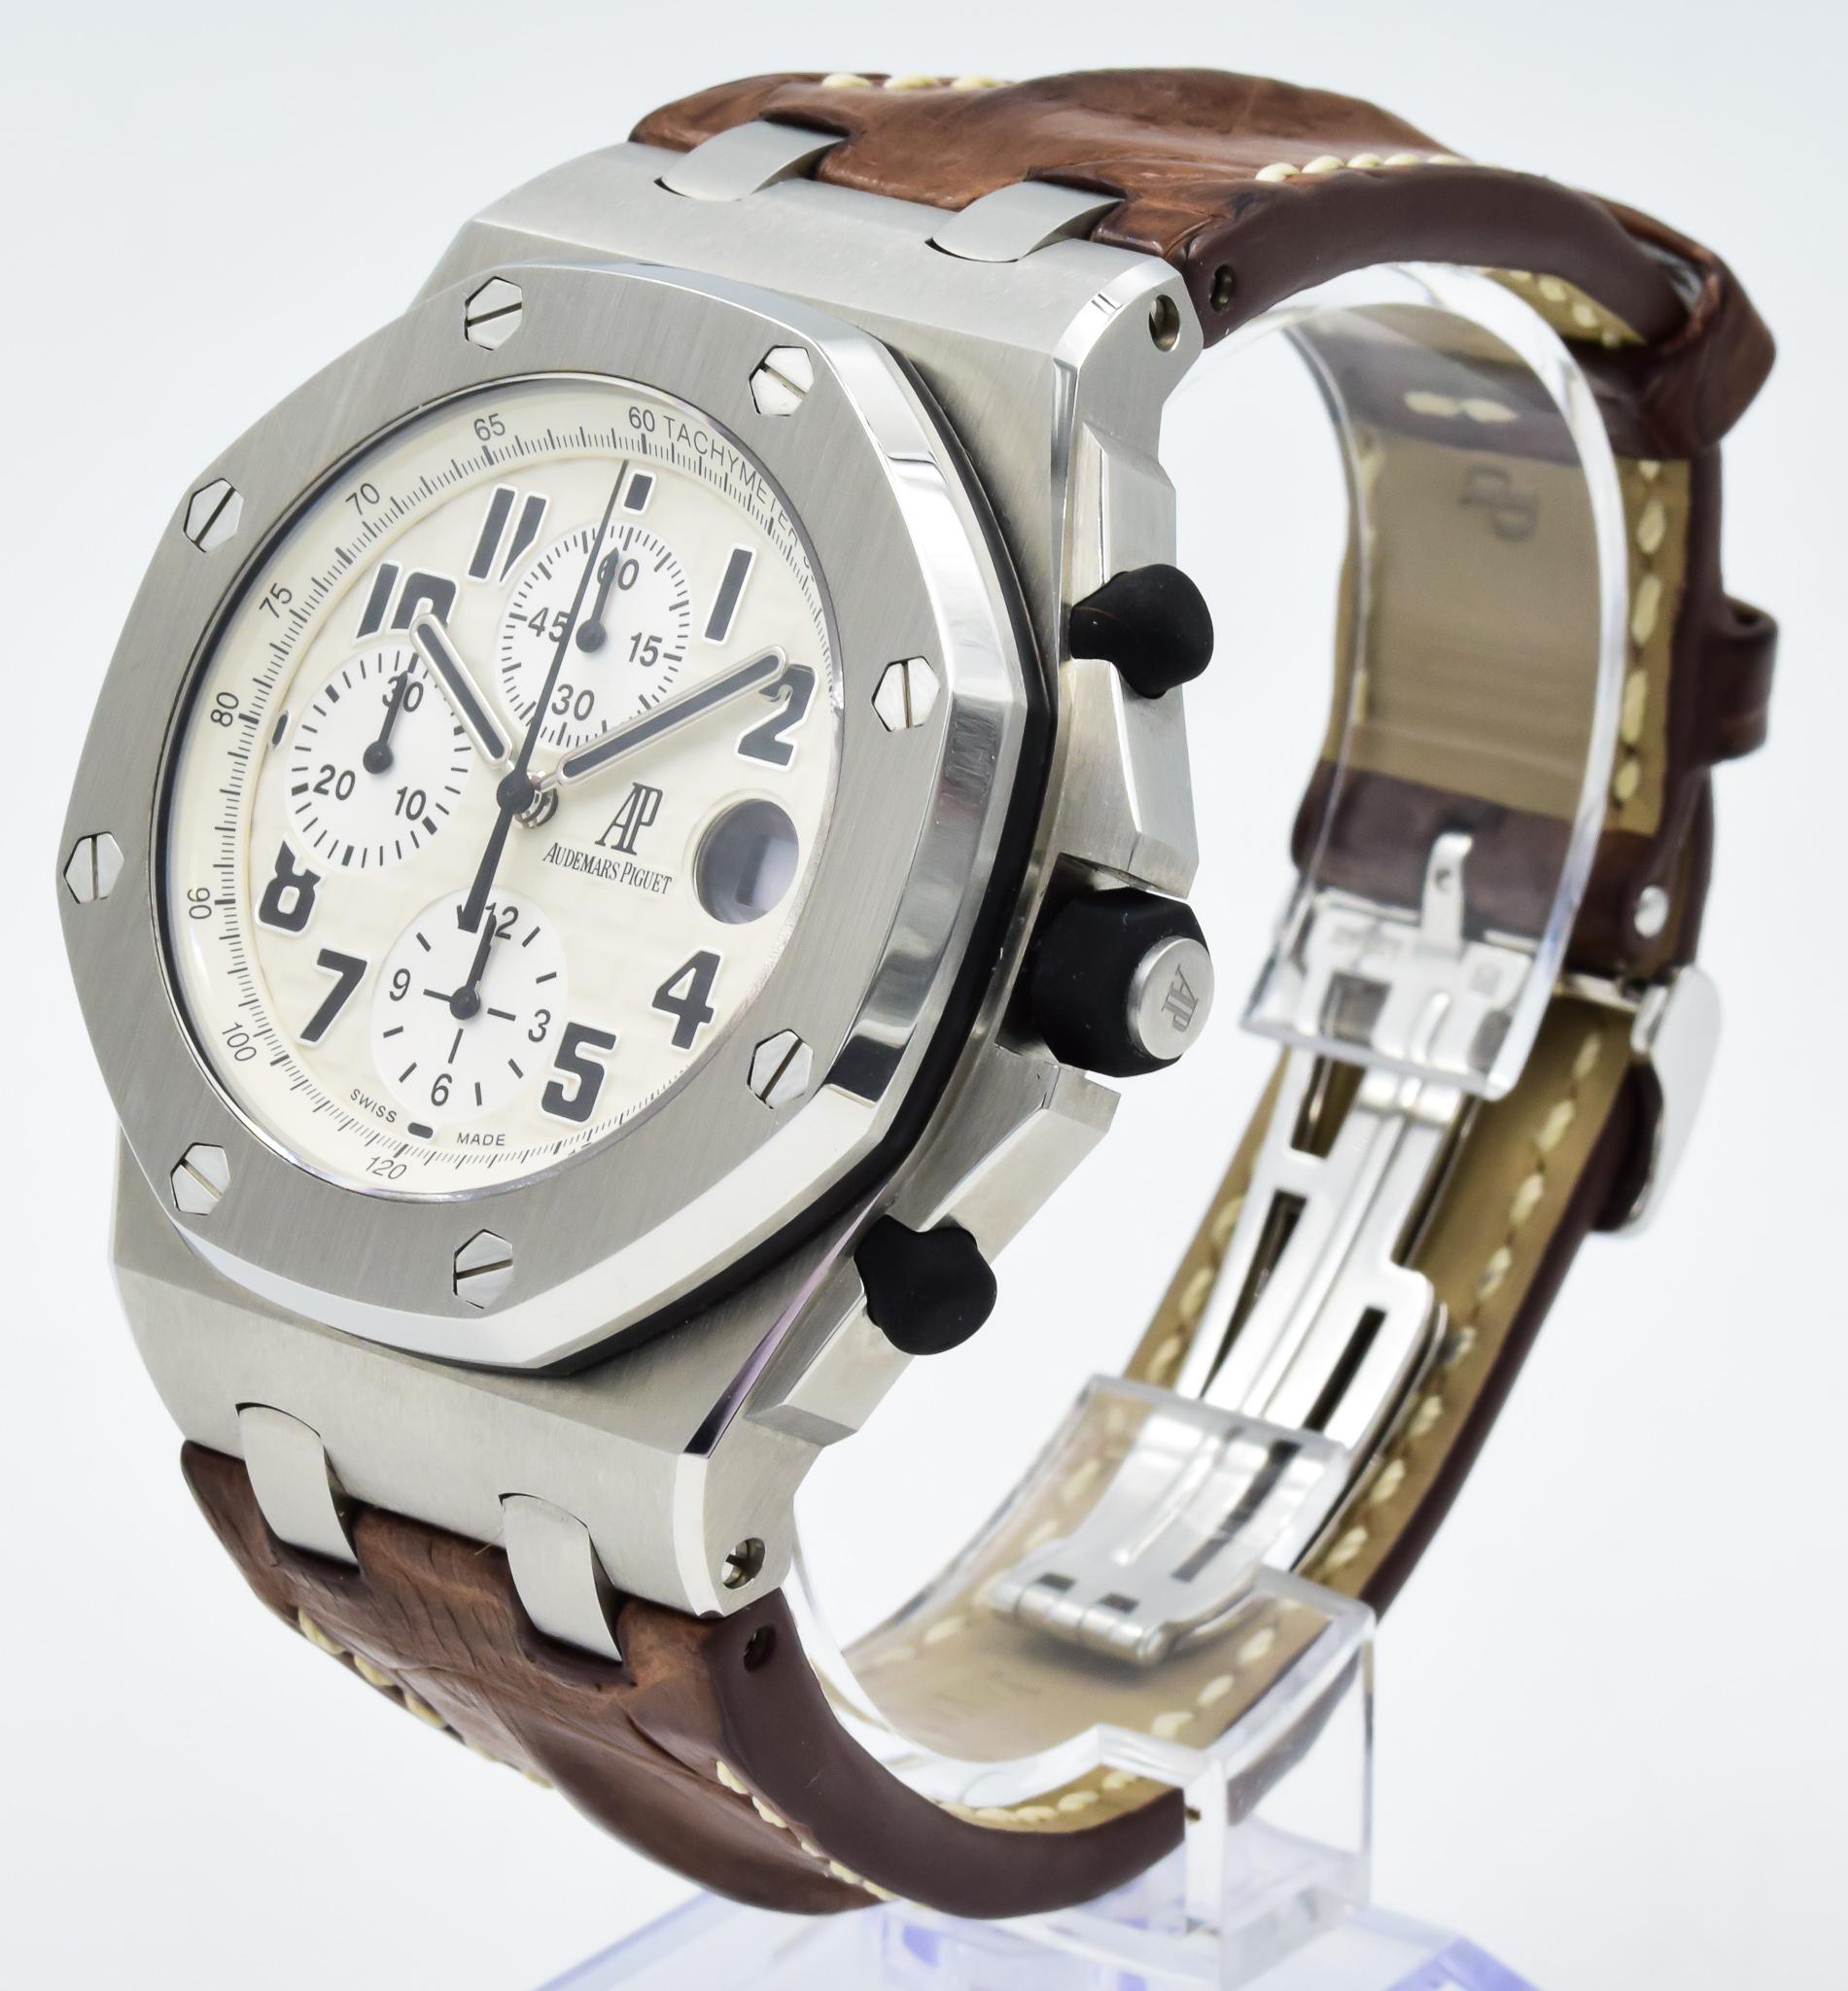 This Audemars Piguet Royal Oak Chronograph was recently traded in to our store and is in excellent condition! This watch does come with the full original box and papers as well! The Royal Oak Offshore is one of the most recognizable and respected